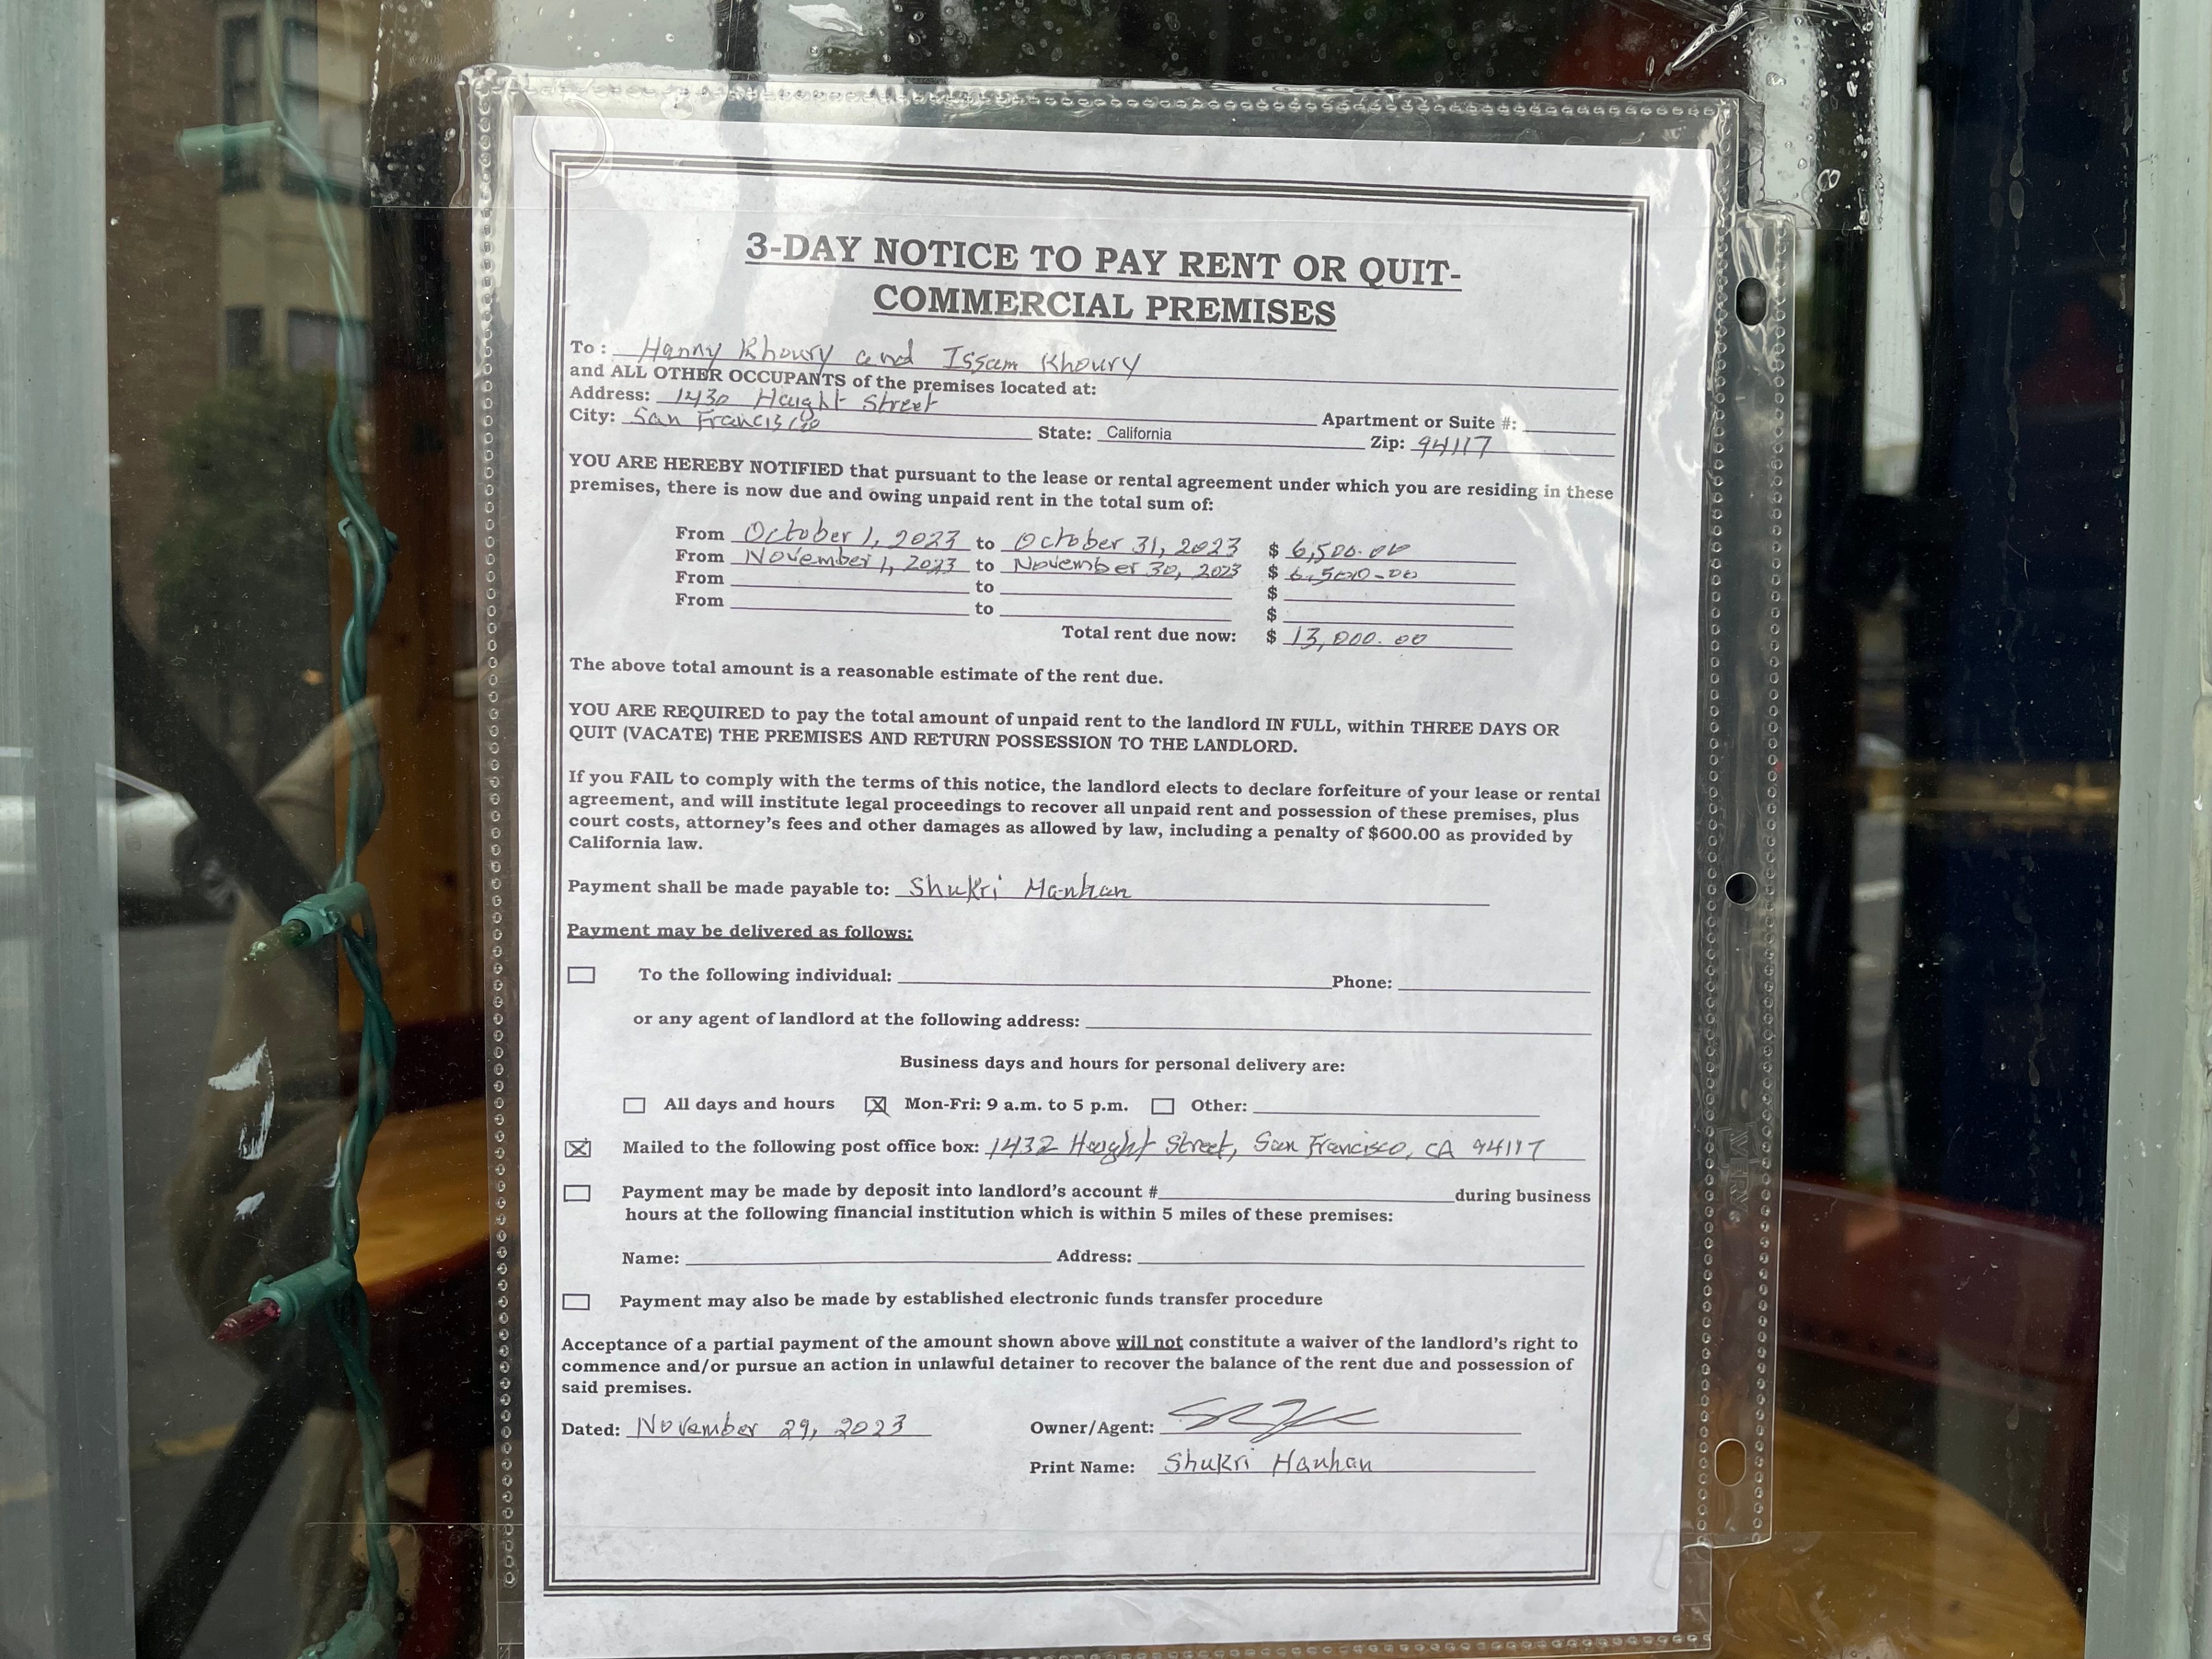 An eviction notice is posted in a restaurant window.